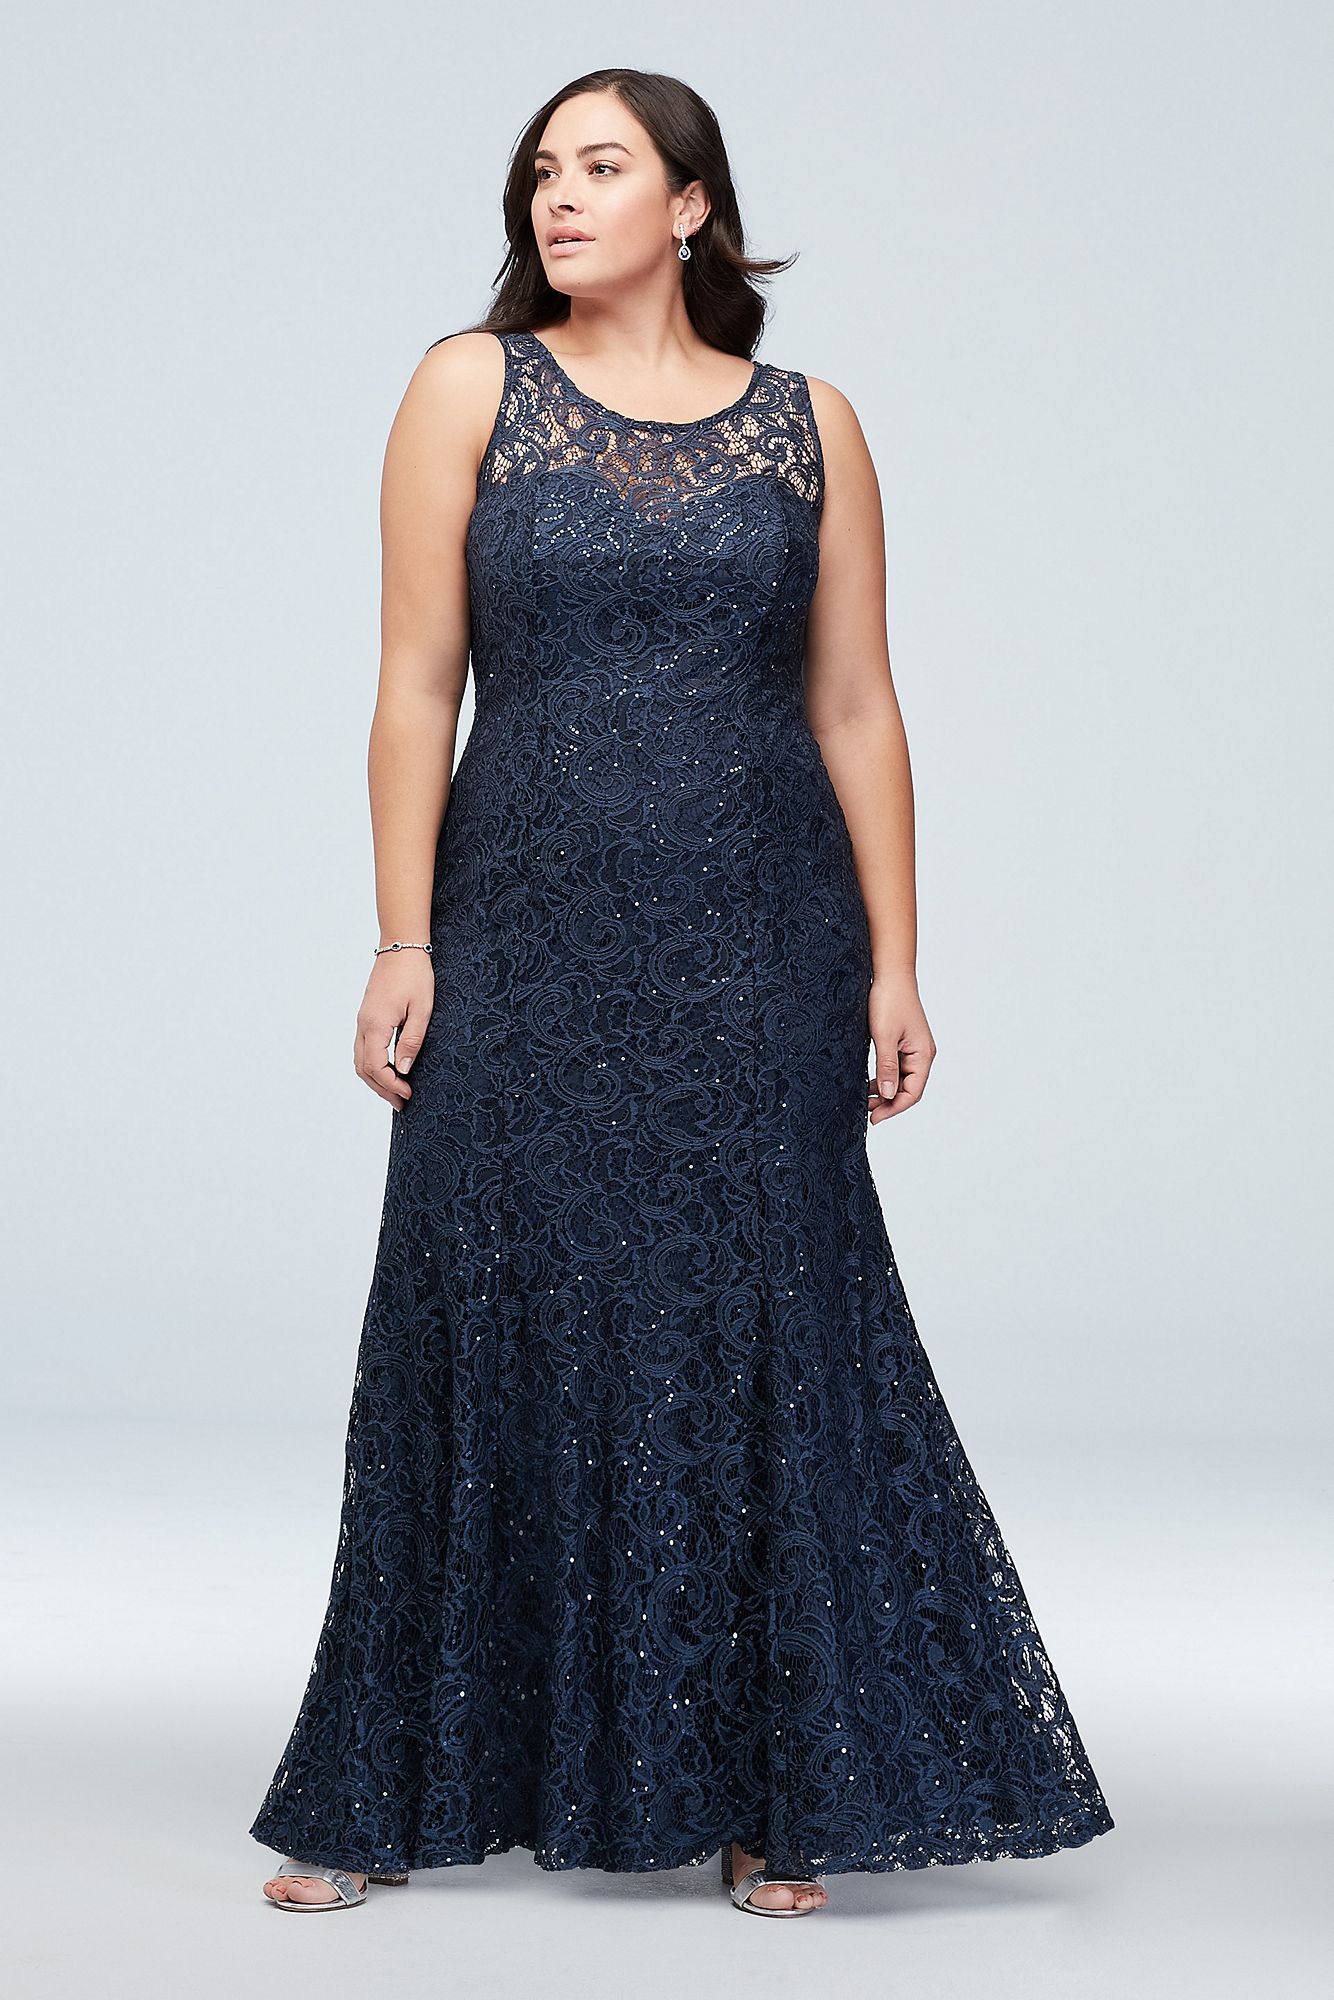 New Plus Size Sequin Lace Party Dress with Flutter Sleeve Style 7419167